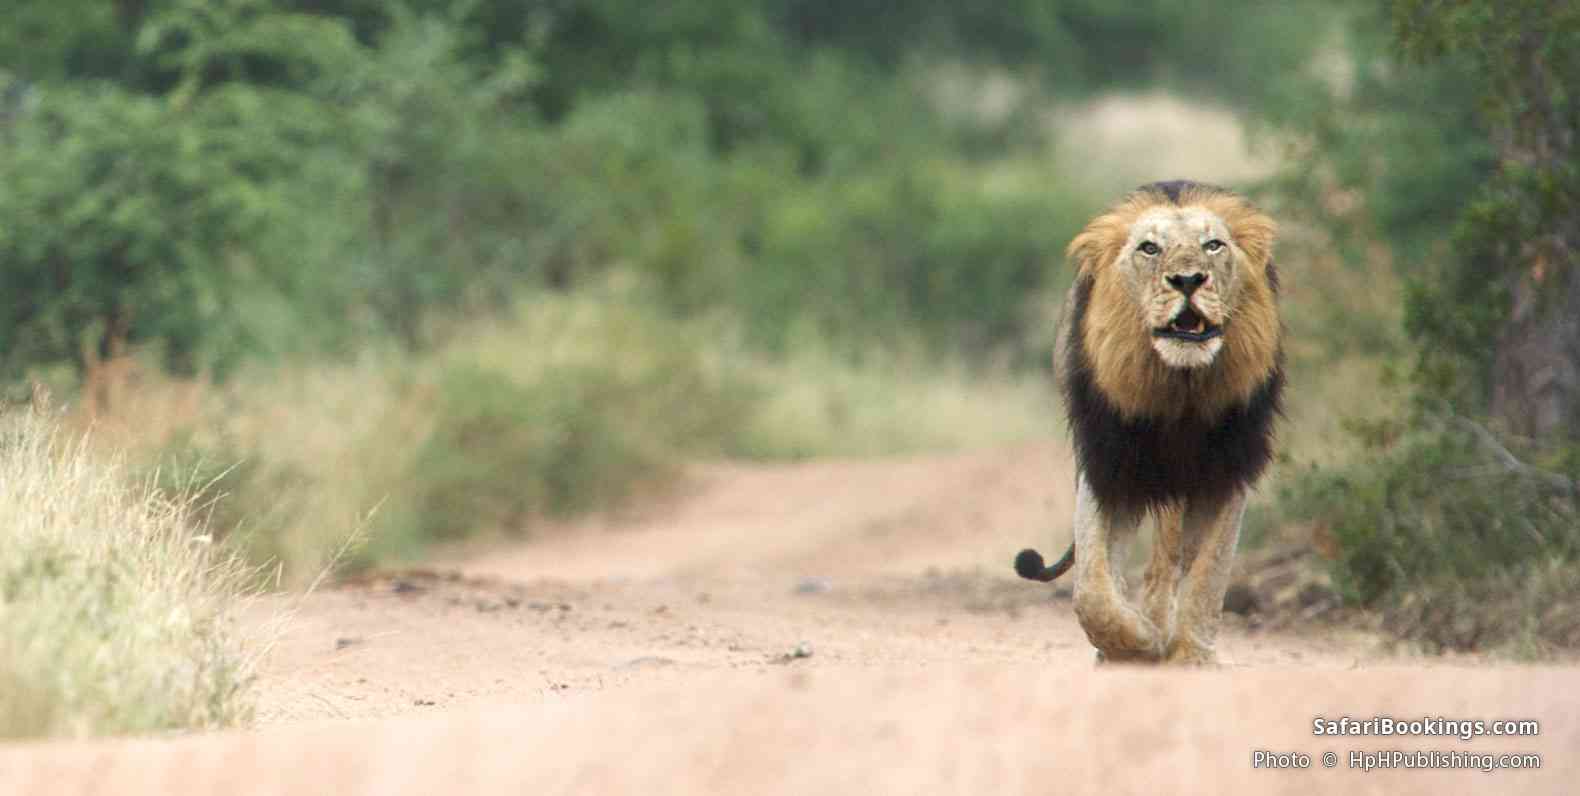 Male lion on the move at MalaMala Game Reserve